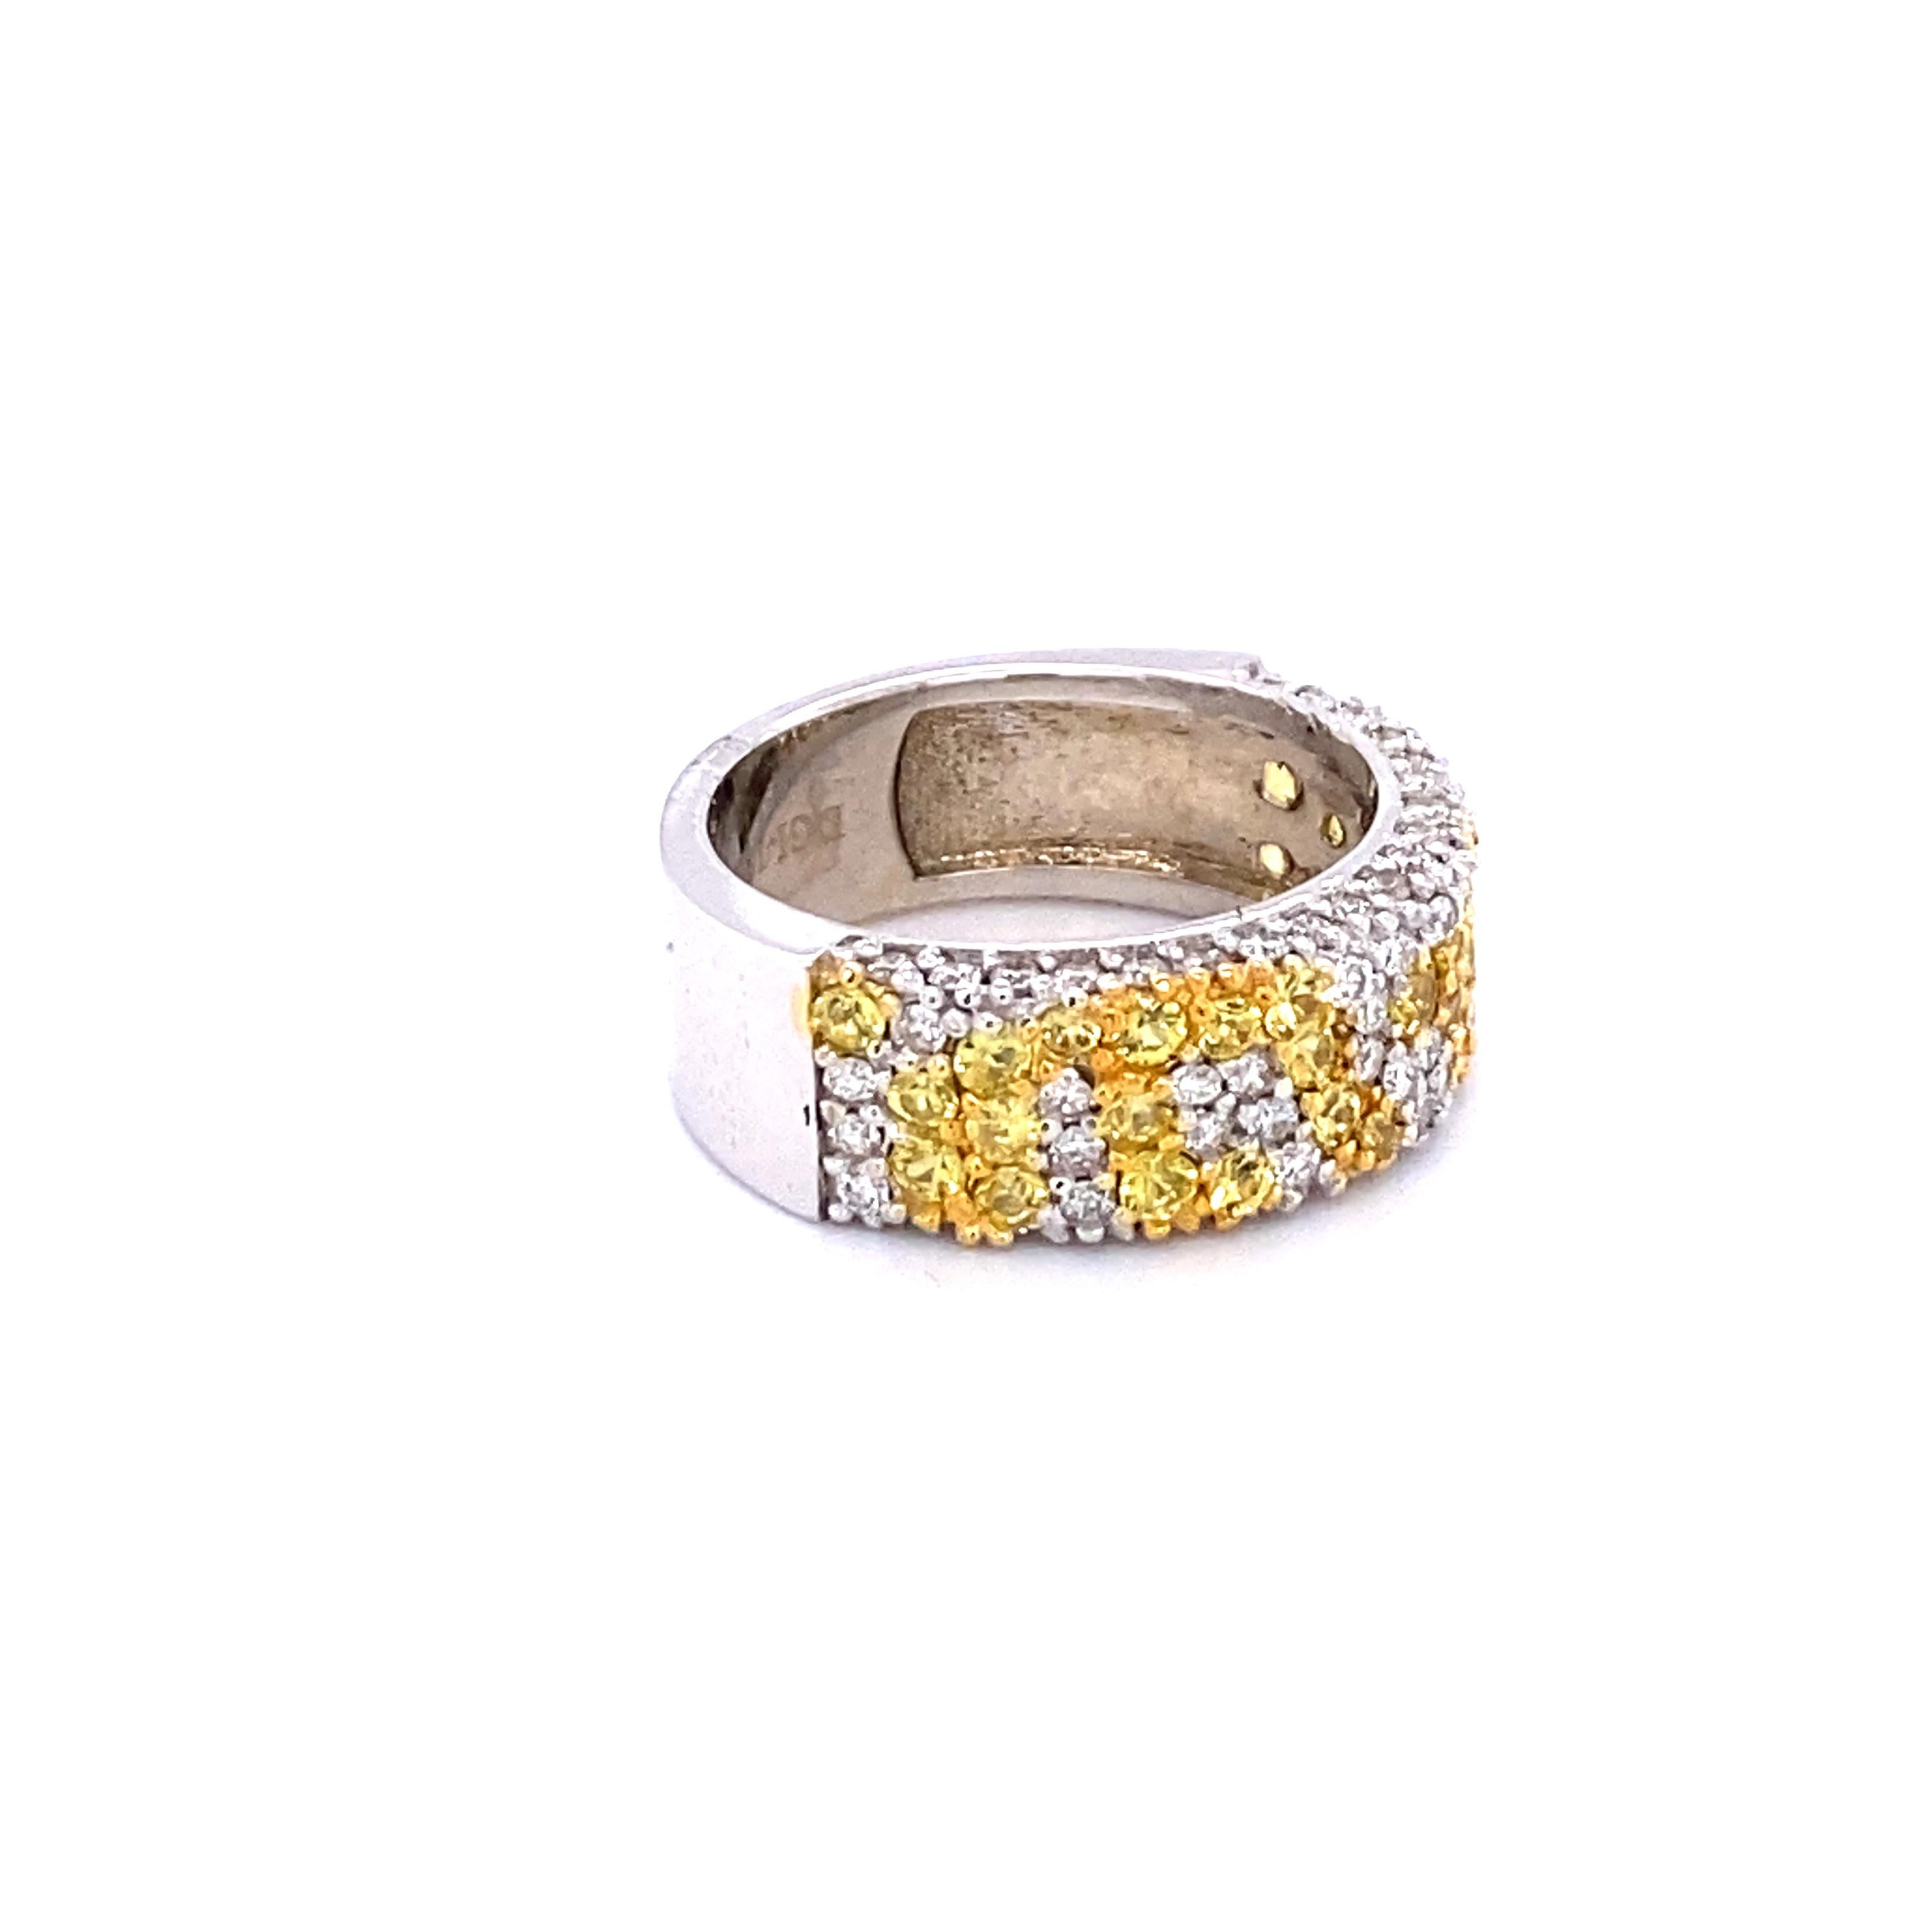 This unique band has a cluster of 35 Yellow Sapphires that weighs 1.27 Carats and 75 Round Cut Diamonds that weigh 0.91 Carats.  The diamonds have a clarity of VS and color of H. The Total Carat Weight of the Band is 2.18 Carats.
The band is crafted